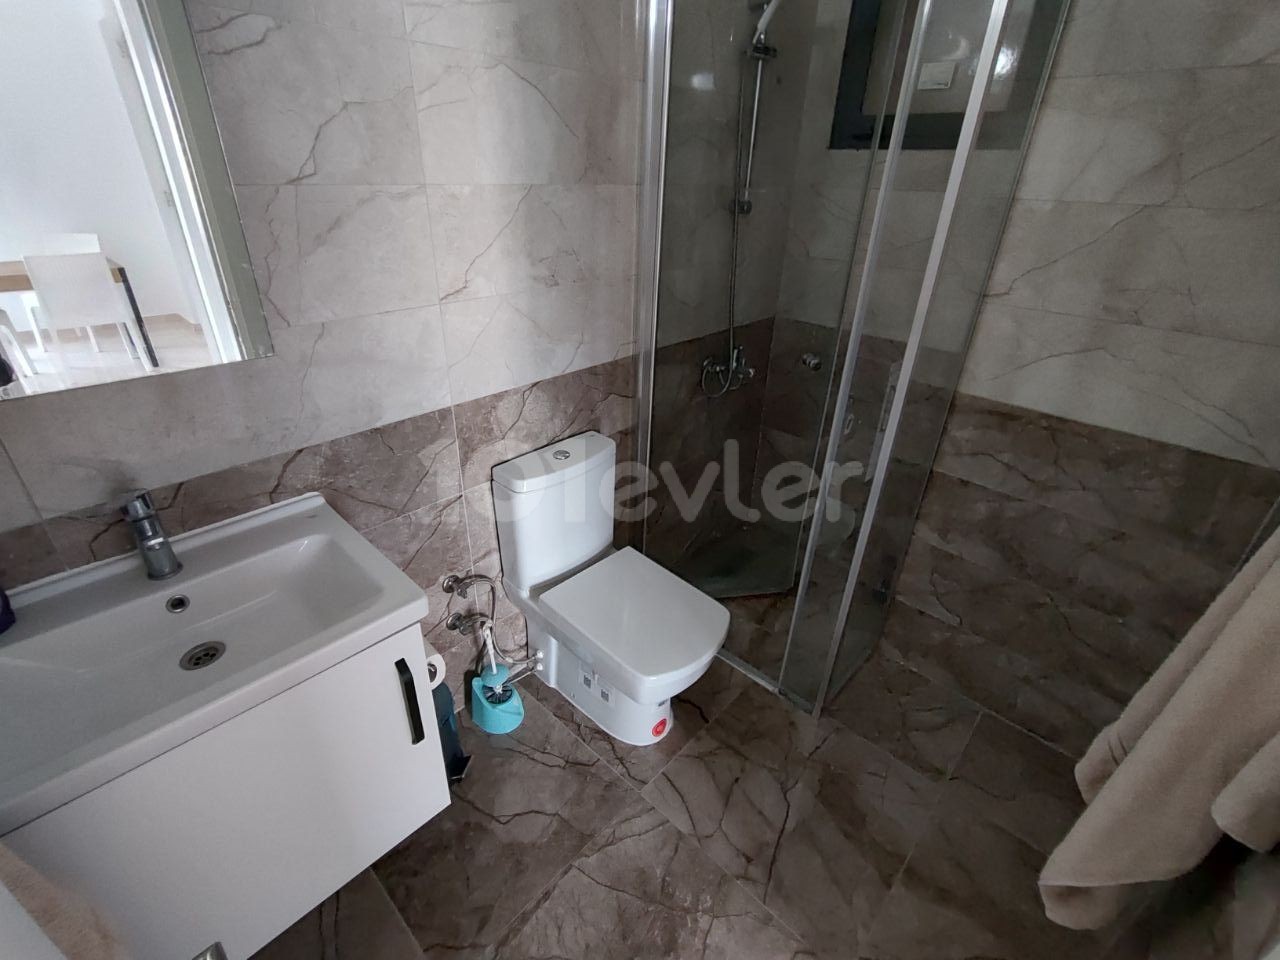 1+1 AND 2+1 FLATS FOR SALE IN LEFKE, NORTHERN CYPRUS